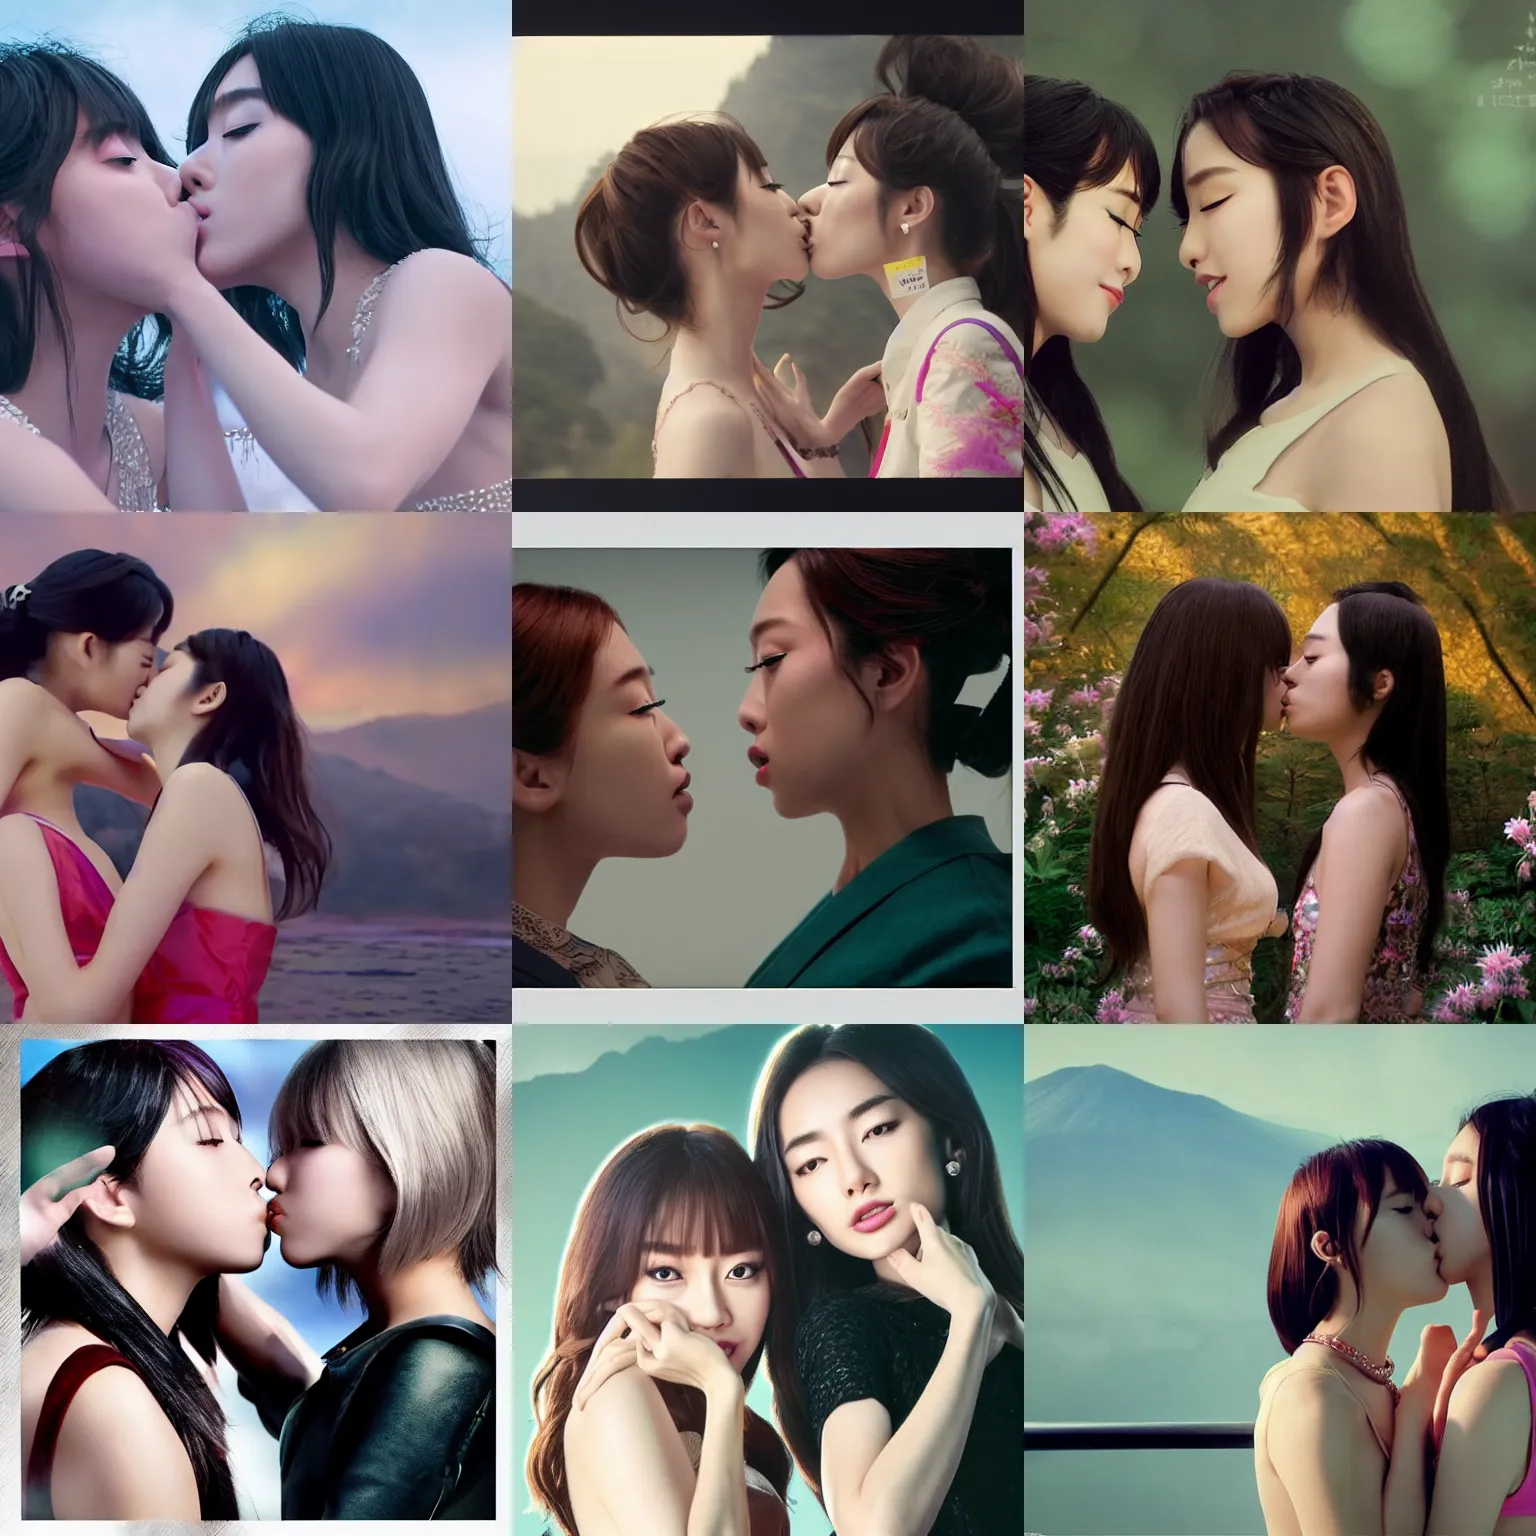 Prompt: unbelievably beautiful, perfect, dynamic, epic, cinematic 8 k hd movie shot, kiss of two japanese beautiful cute young j - pop idols av actresses girls, they kiss each other. motion, vfx, inspirational arthouse, high budget, hollywood style, at behance, at netflix, with instagram filters, photoshop, adobe lightroom, adobe after effects, taken with polaroid kodak portra